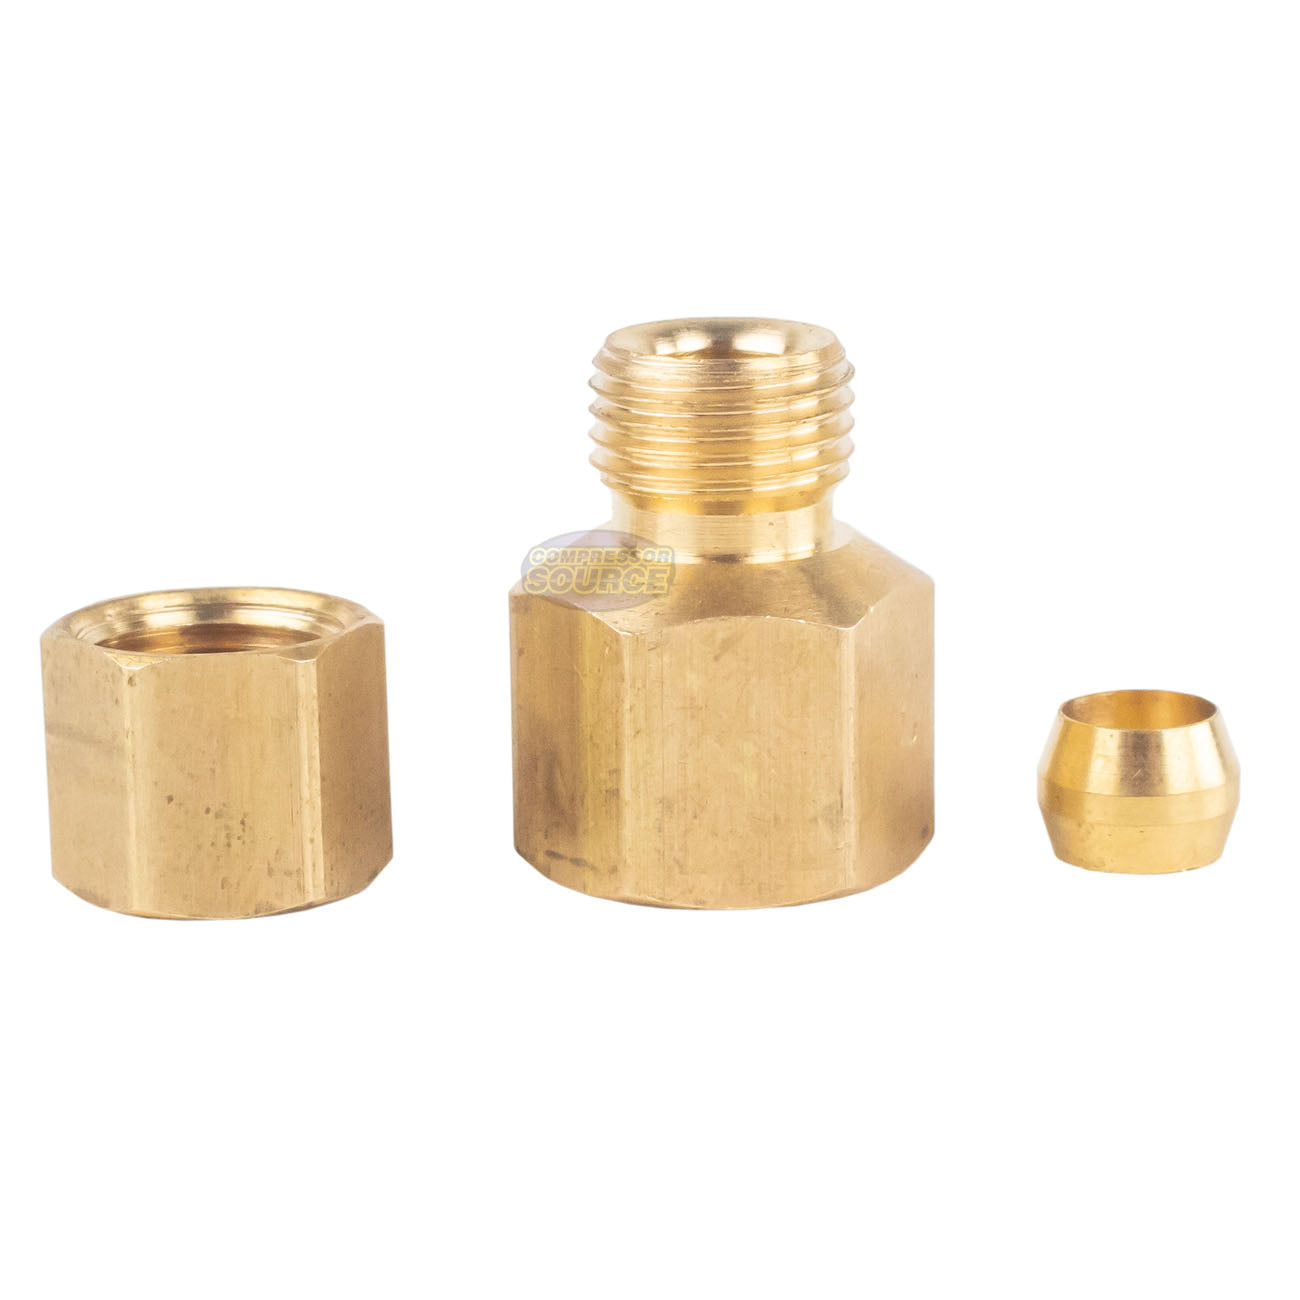 1/4" FNPT x 1/4" Compression Brass Female Pipe Fitting Connector with Ferrule